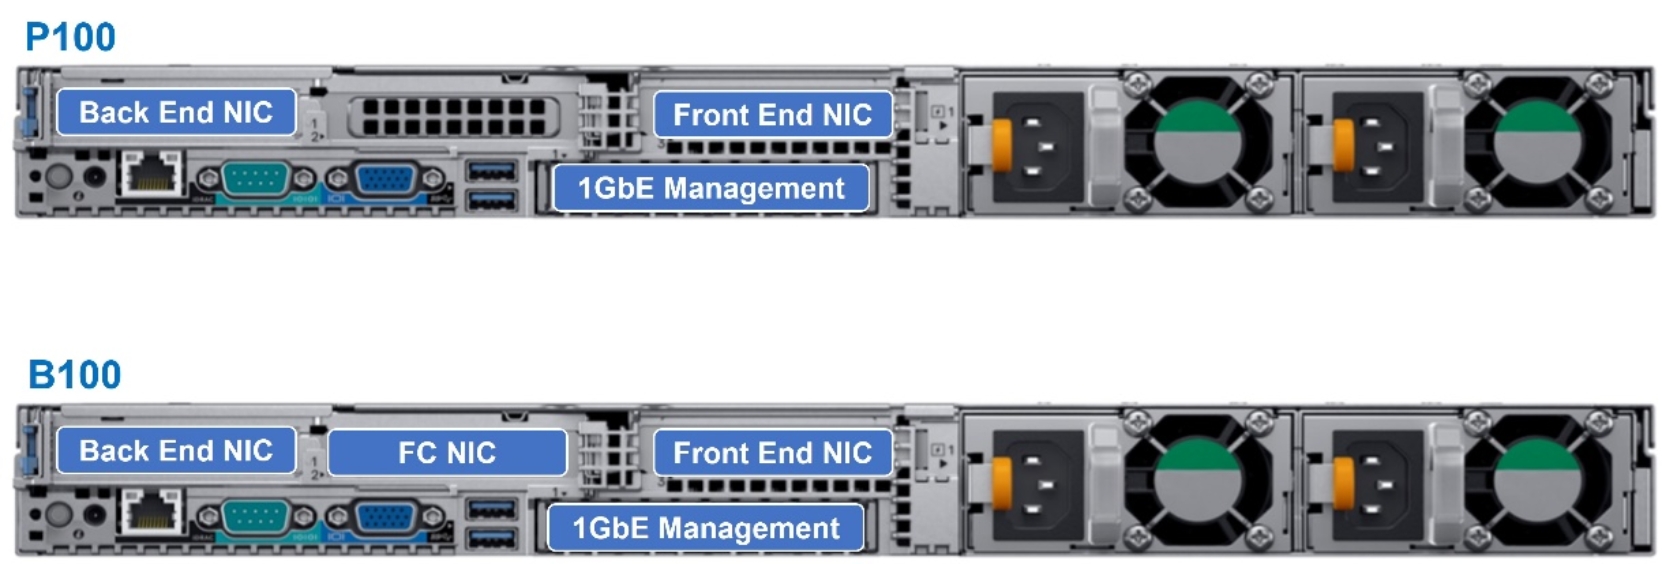 A diagram depicting the rear view highlighting the internal back-end and front-end NIC ports for the P100 and B100 nodes.